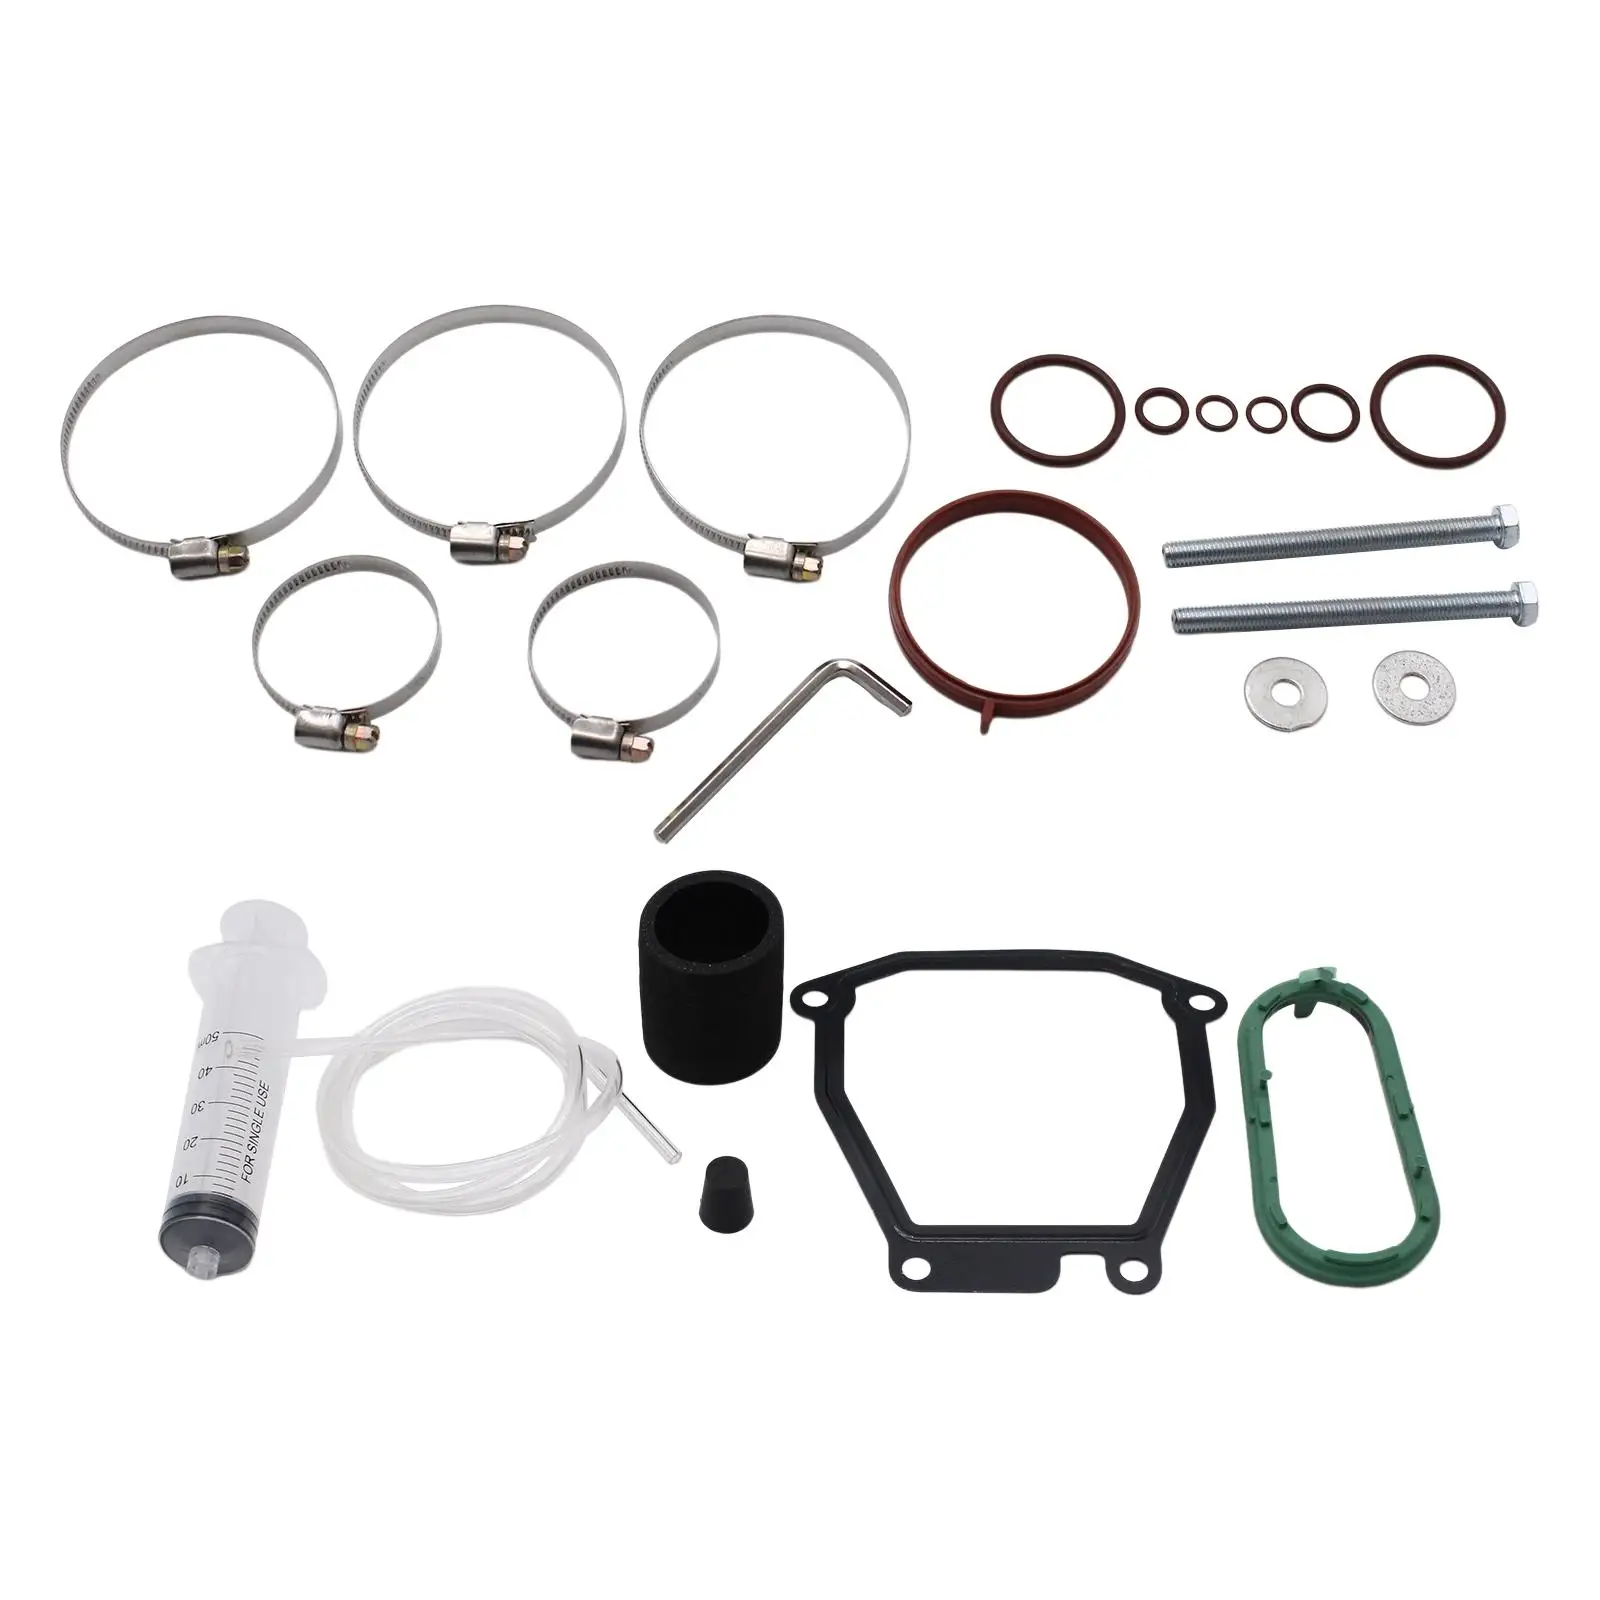 Car Car Supercharger Rebuild Kit Replaces for S R53 R52 High performance Parts Easy to Install Automotive